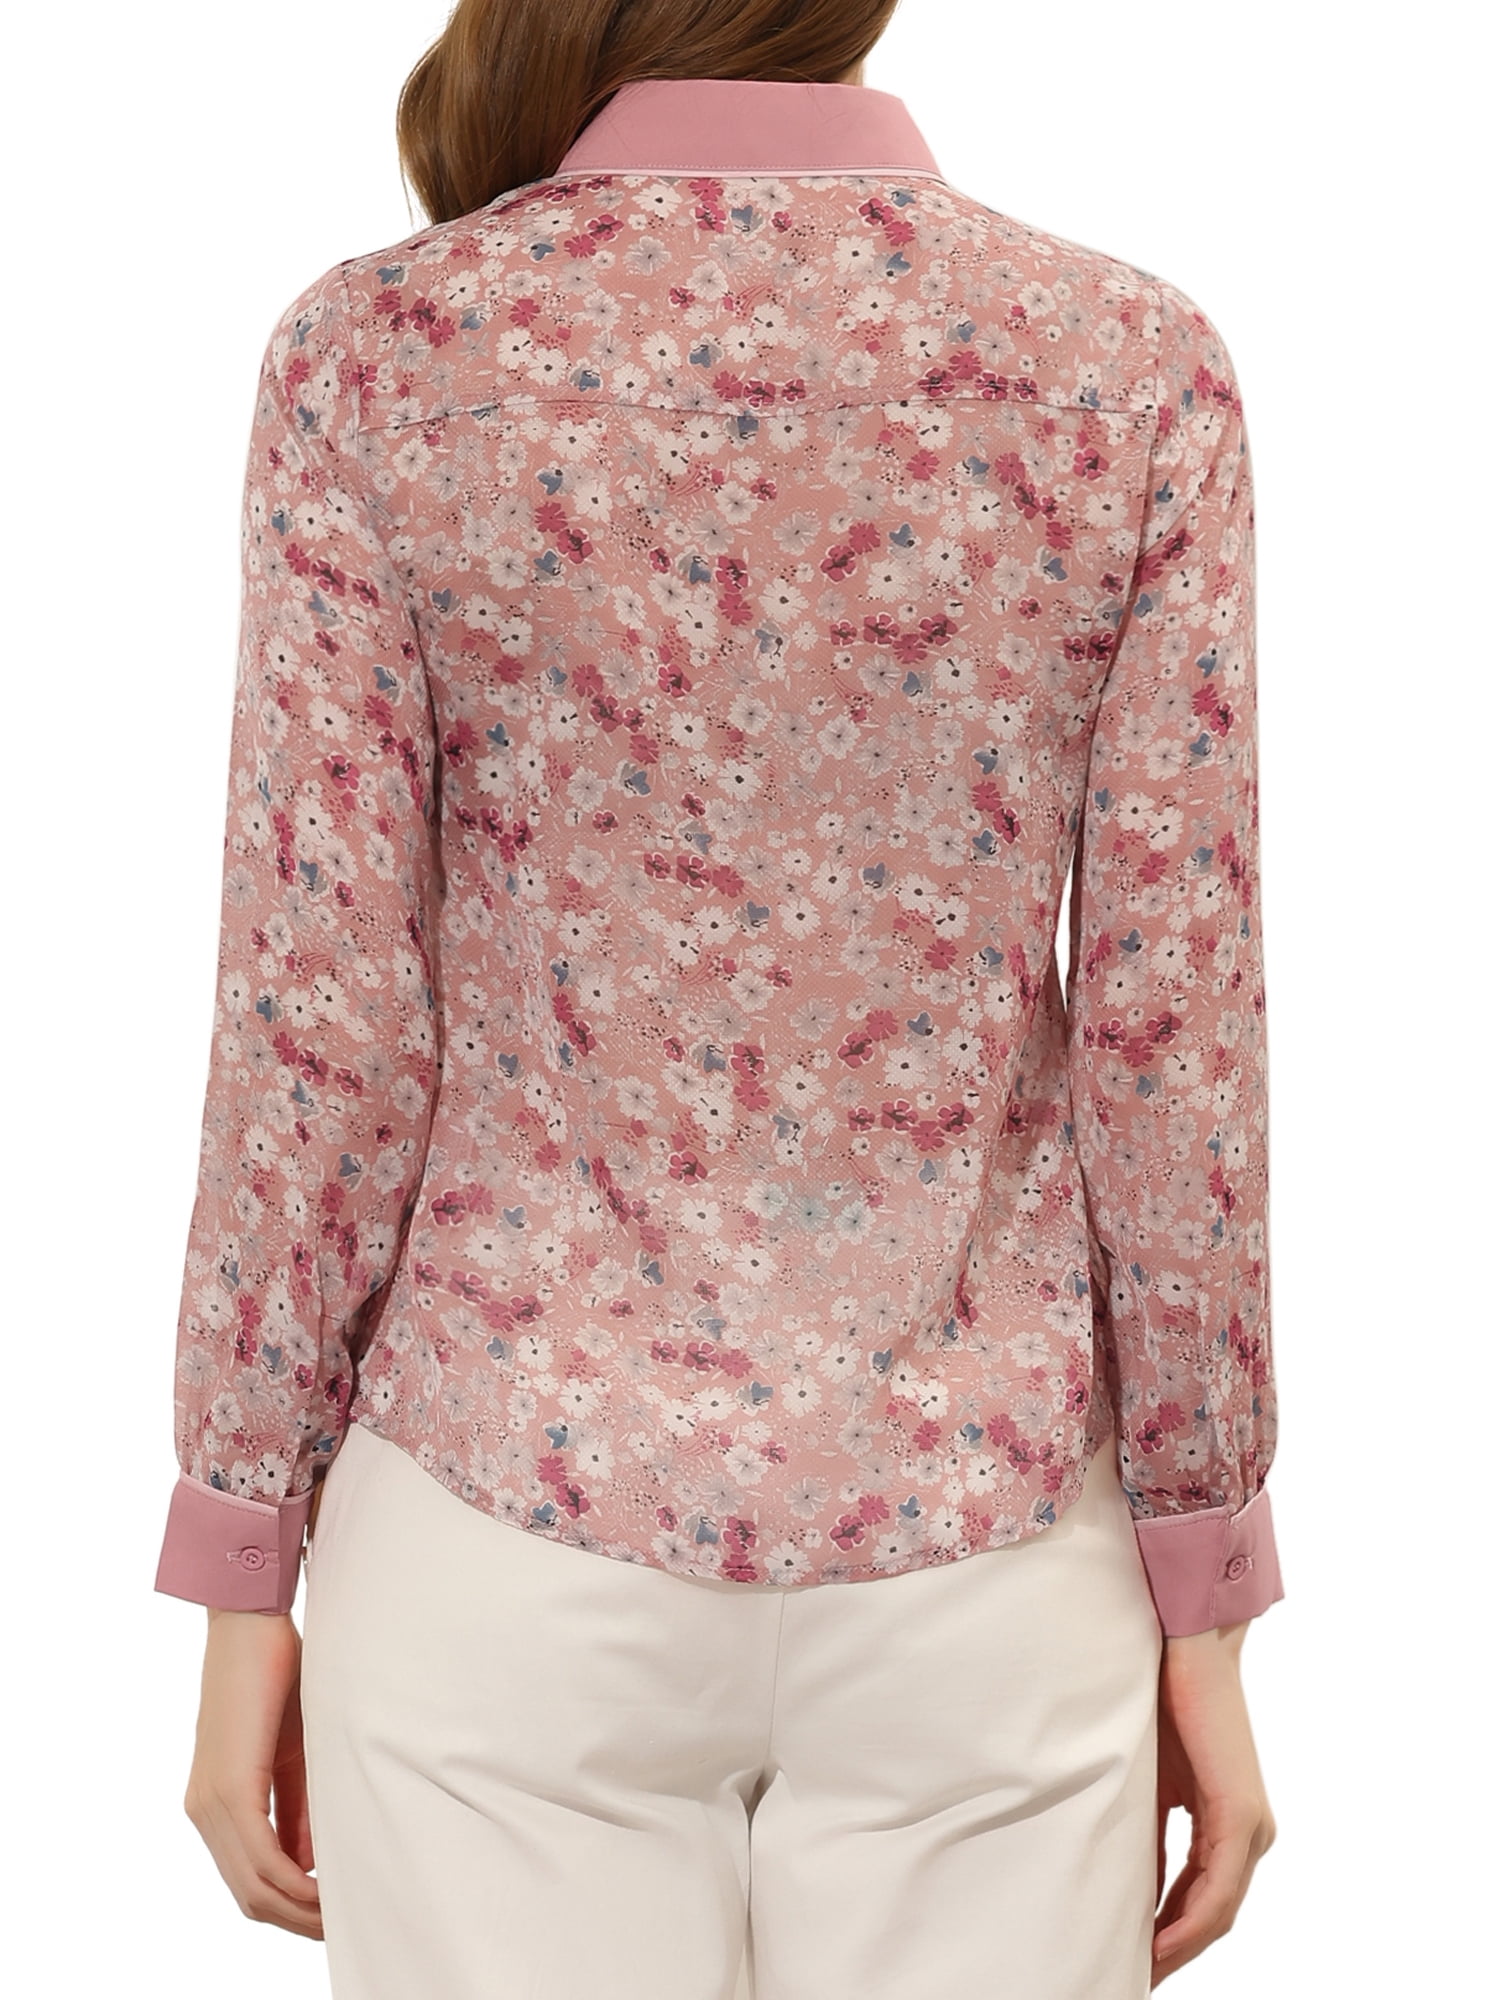 Allegra K Women's Floral Button up Contrast Color Long Sleeve Work